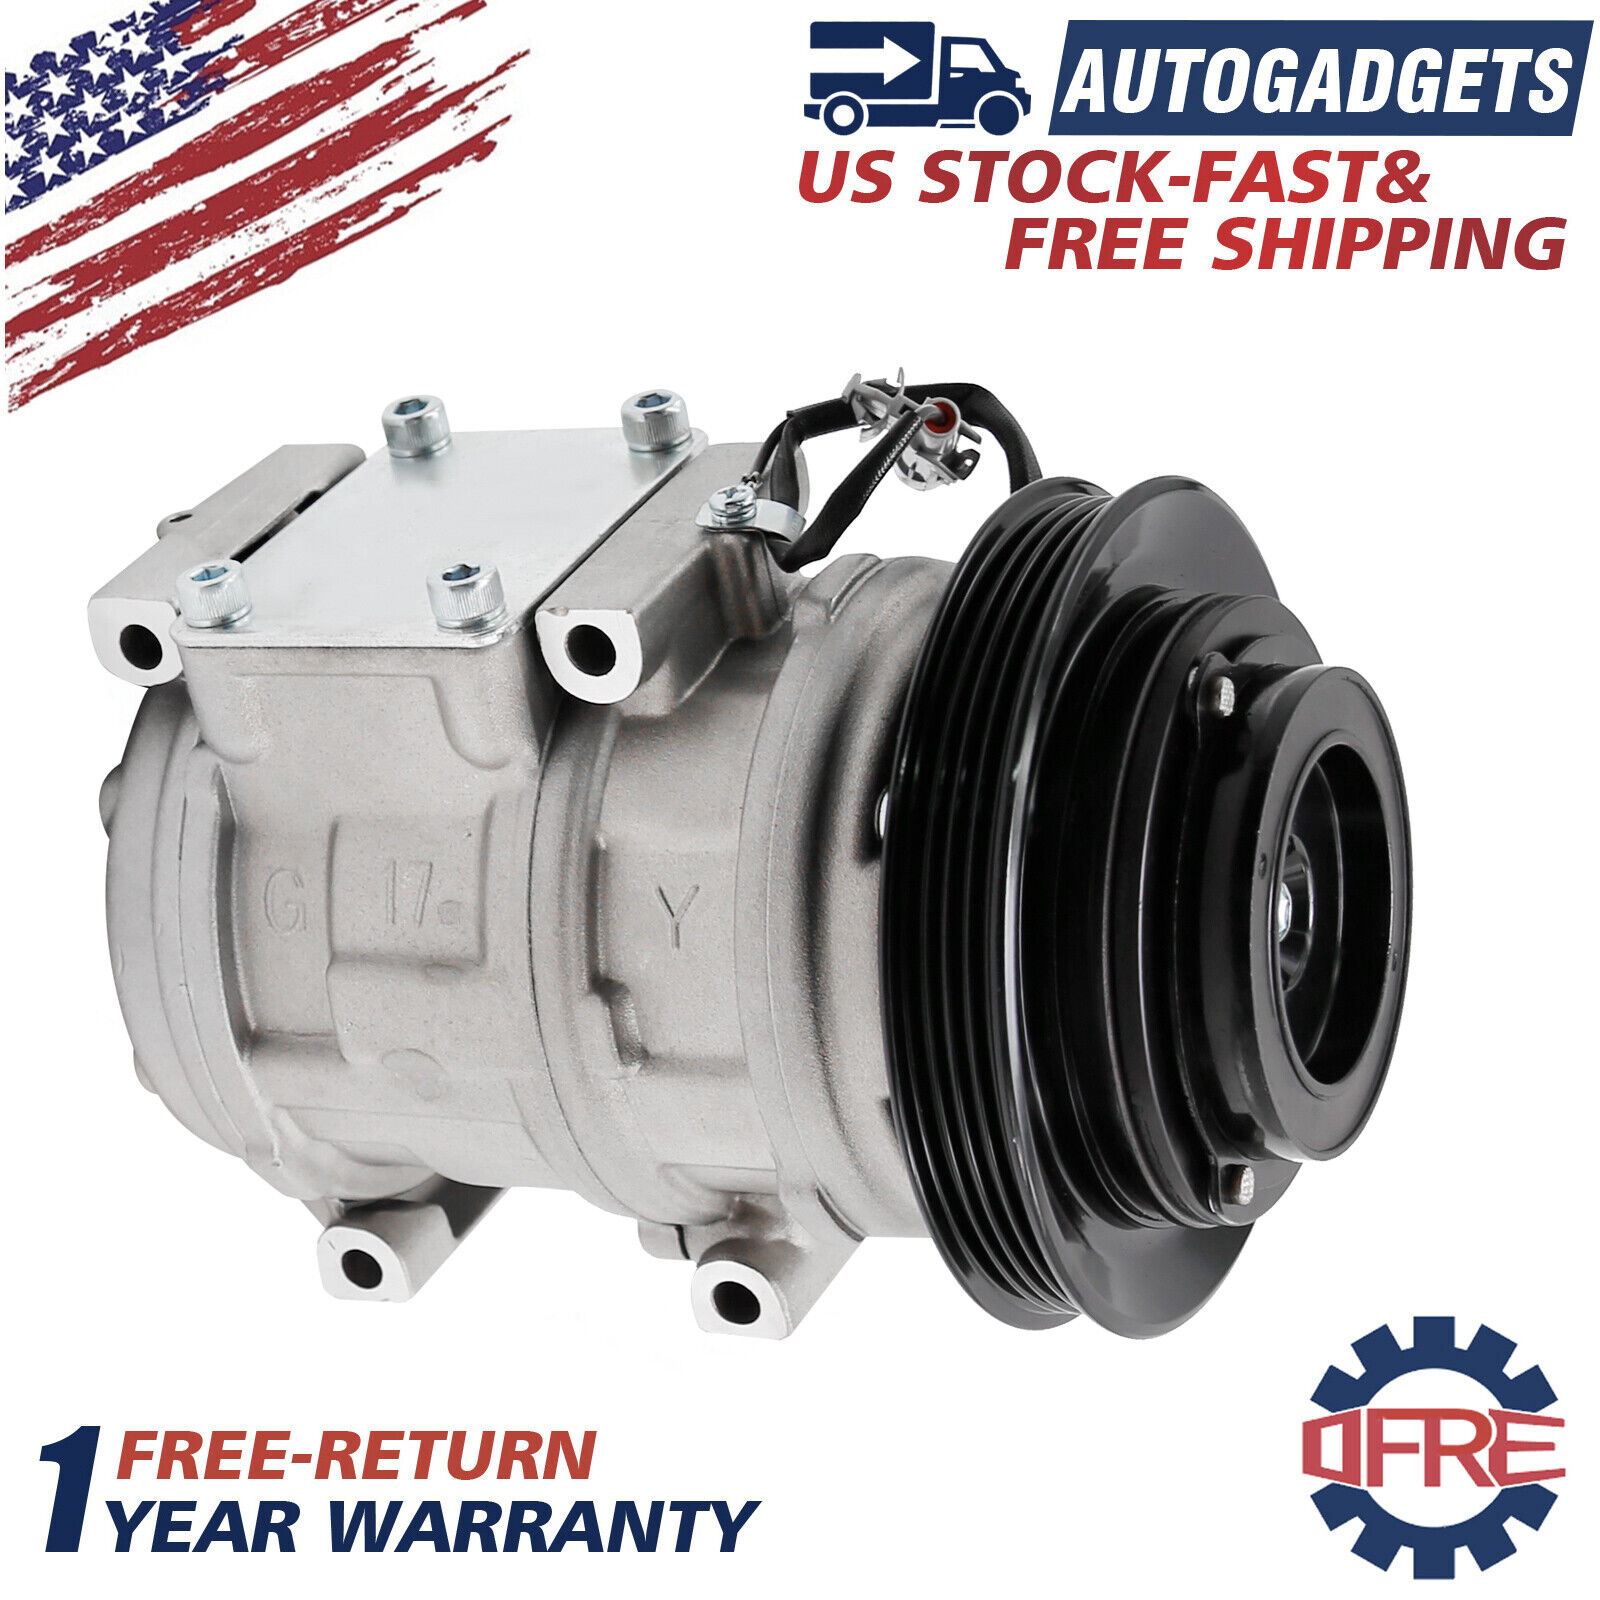 A/C Compressor and Clutch for Toyota 4 Runner 3.4L 1996-2002 CO 22012C